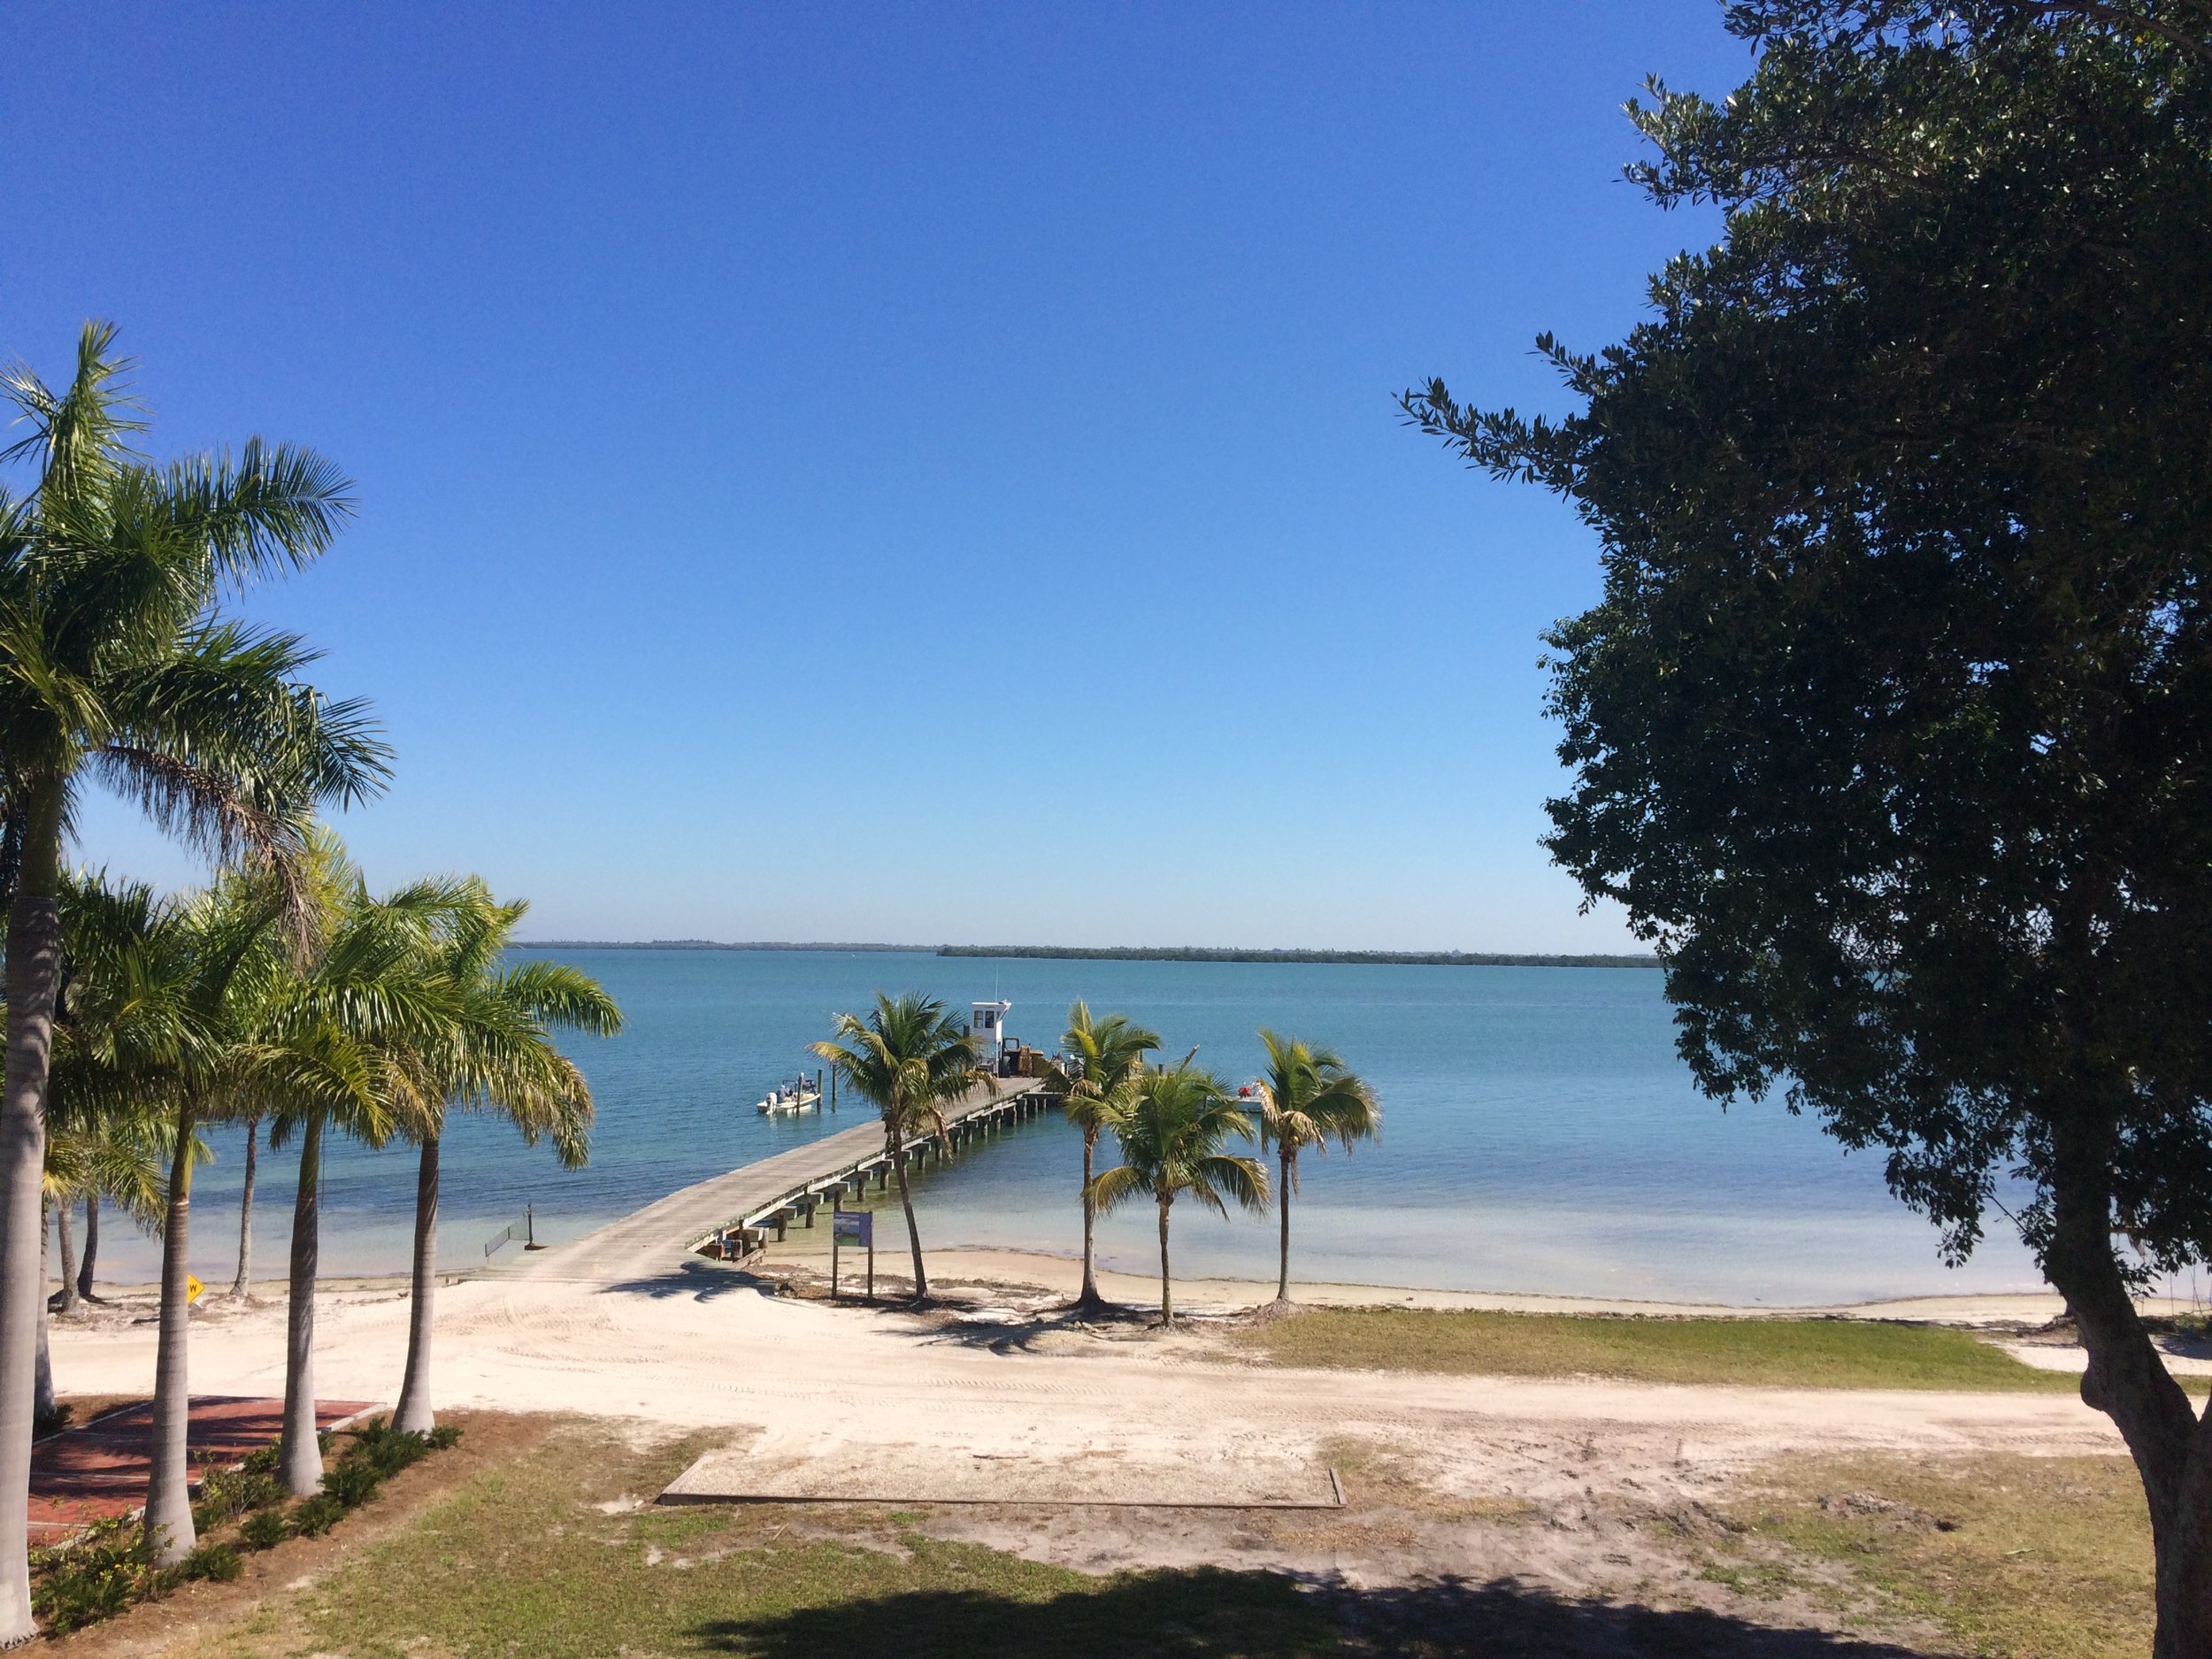 View of Pine Island Sound from Collier Inn